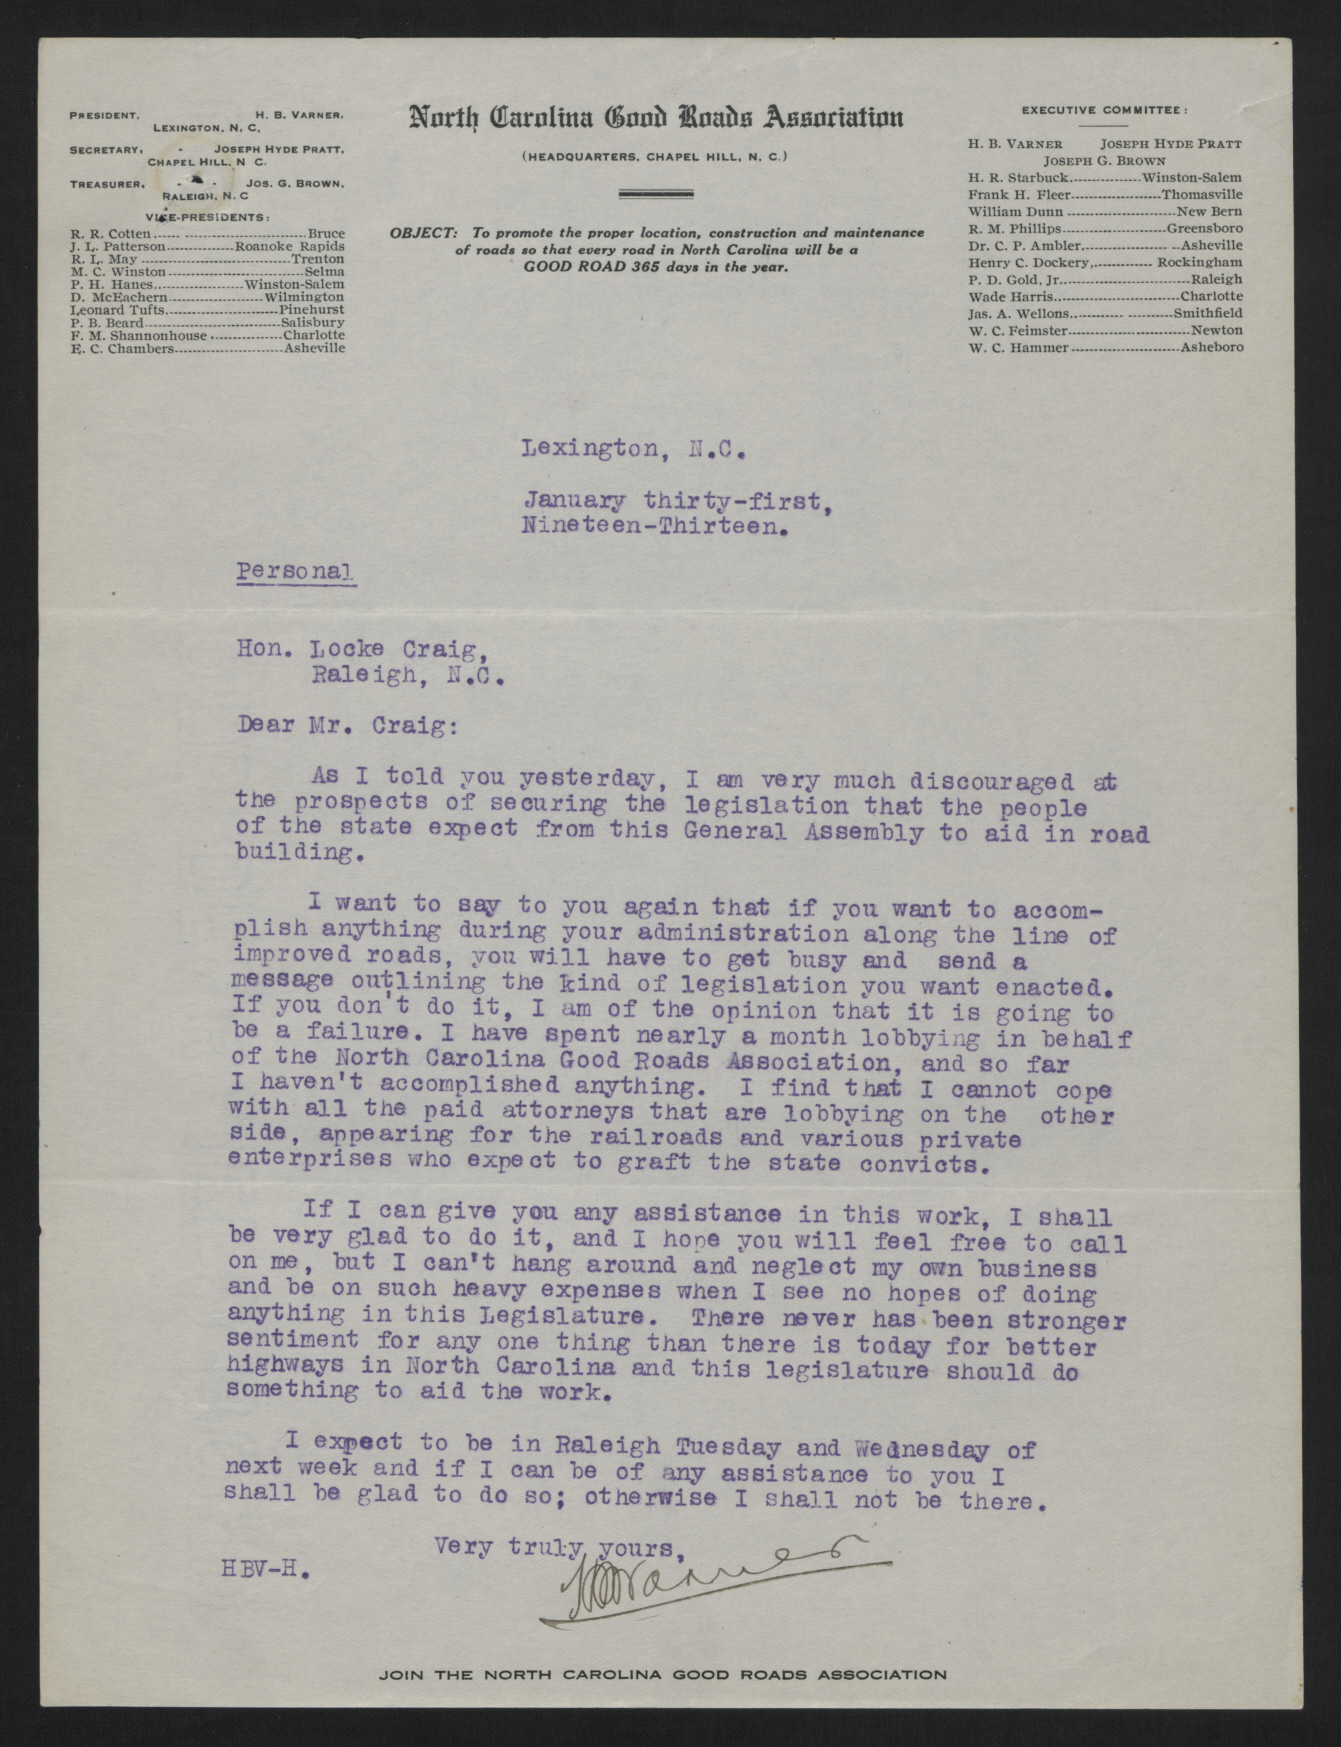 Letter from Varner to Craig, January 31, 1913